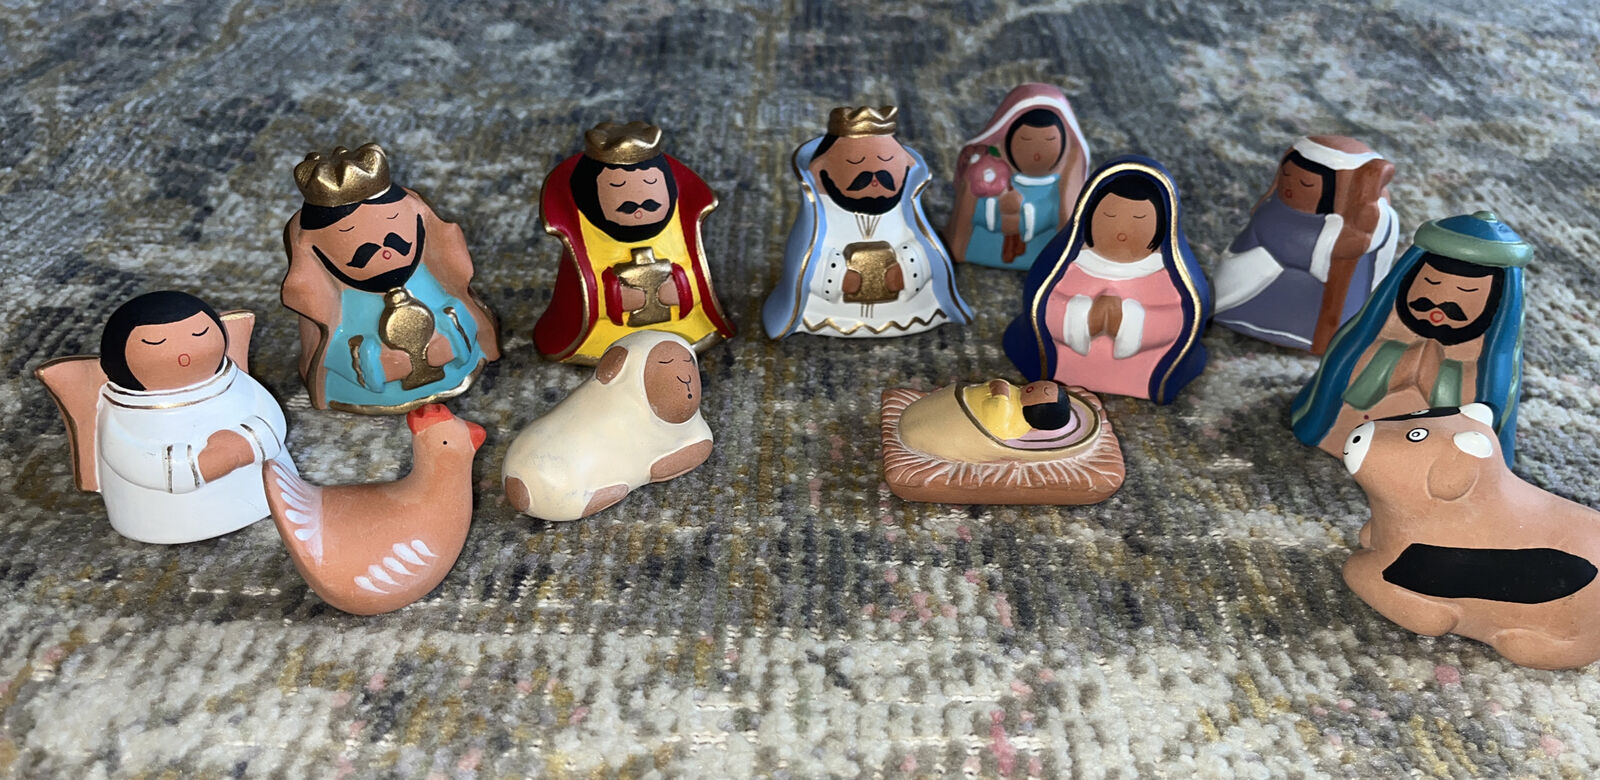 12 pc - Vintage Handcrafted Philippines Nativity Set From “Cost Plus Store”